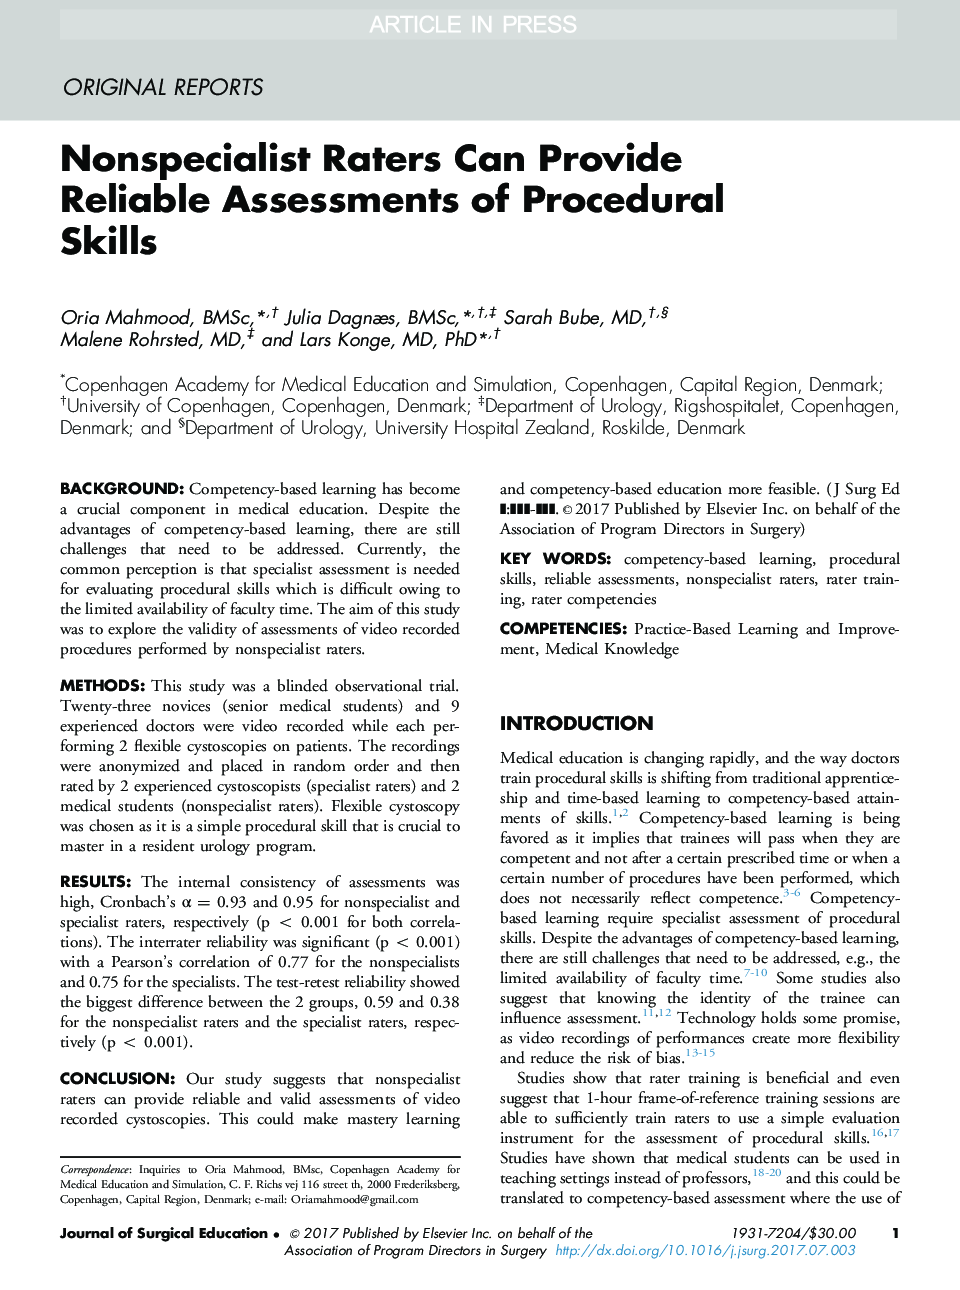 Nonspecialist Raters Can Provide Reliable Assessments of Procedural Skills